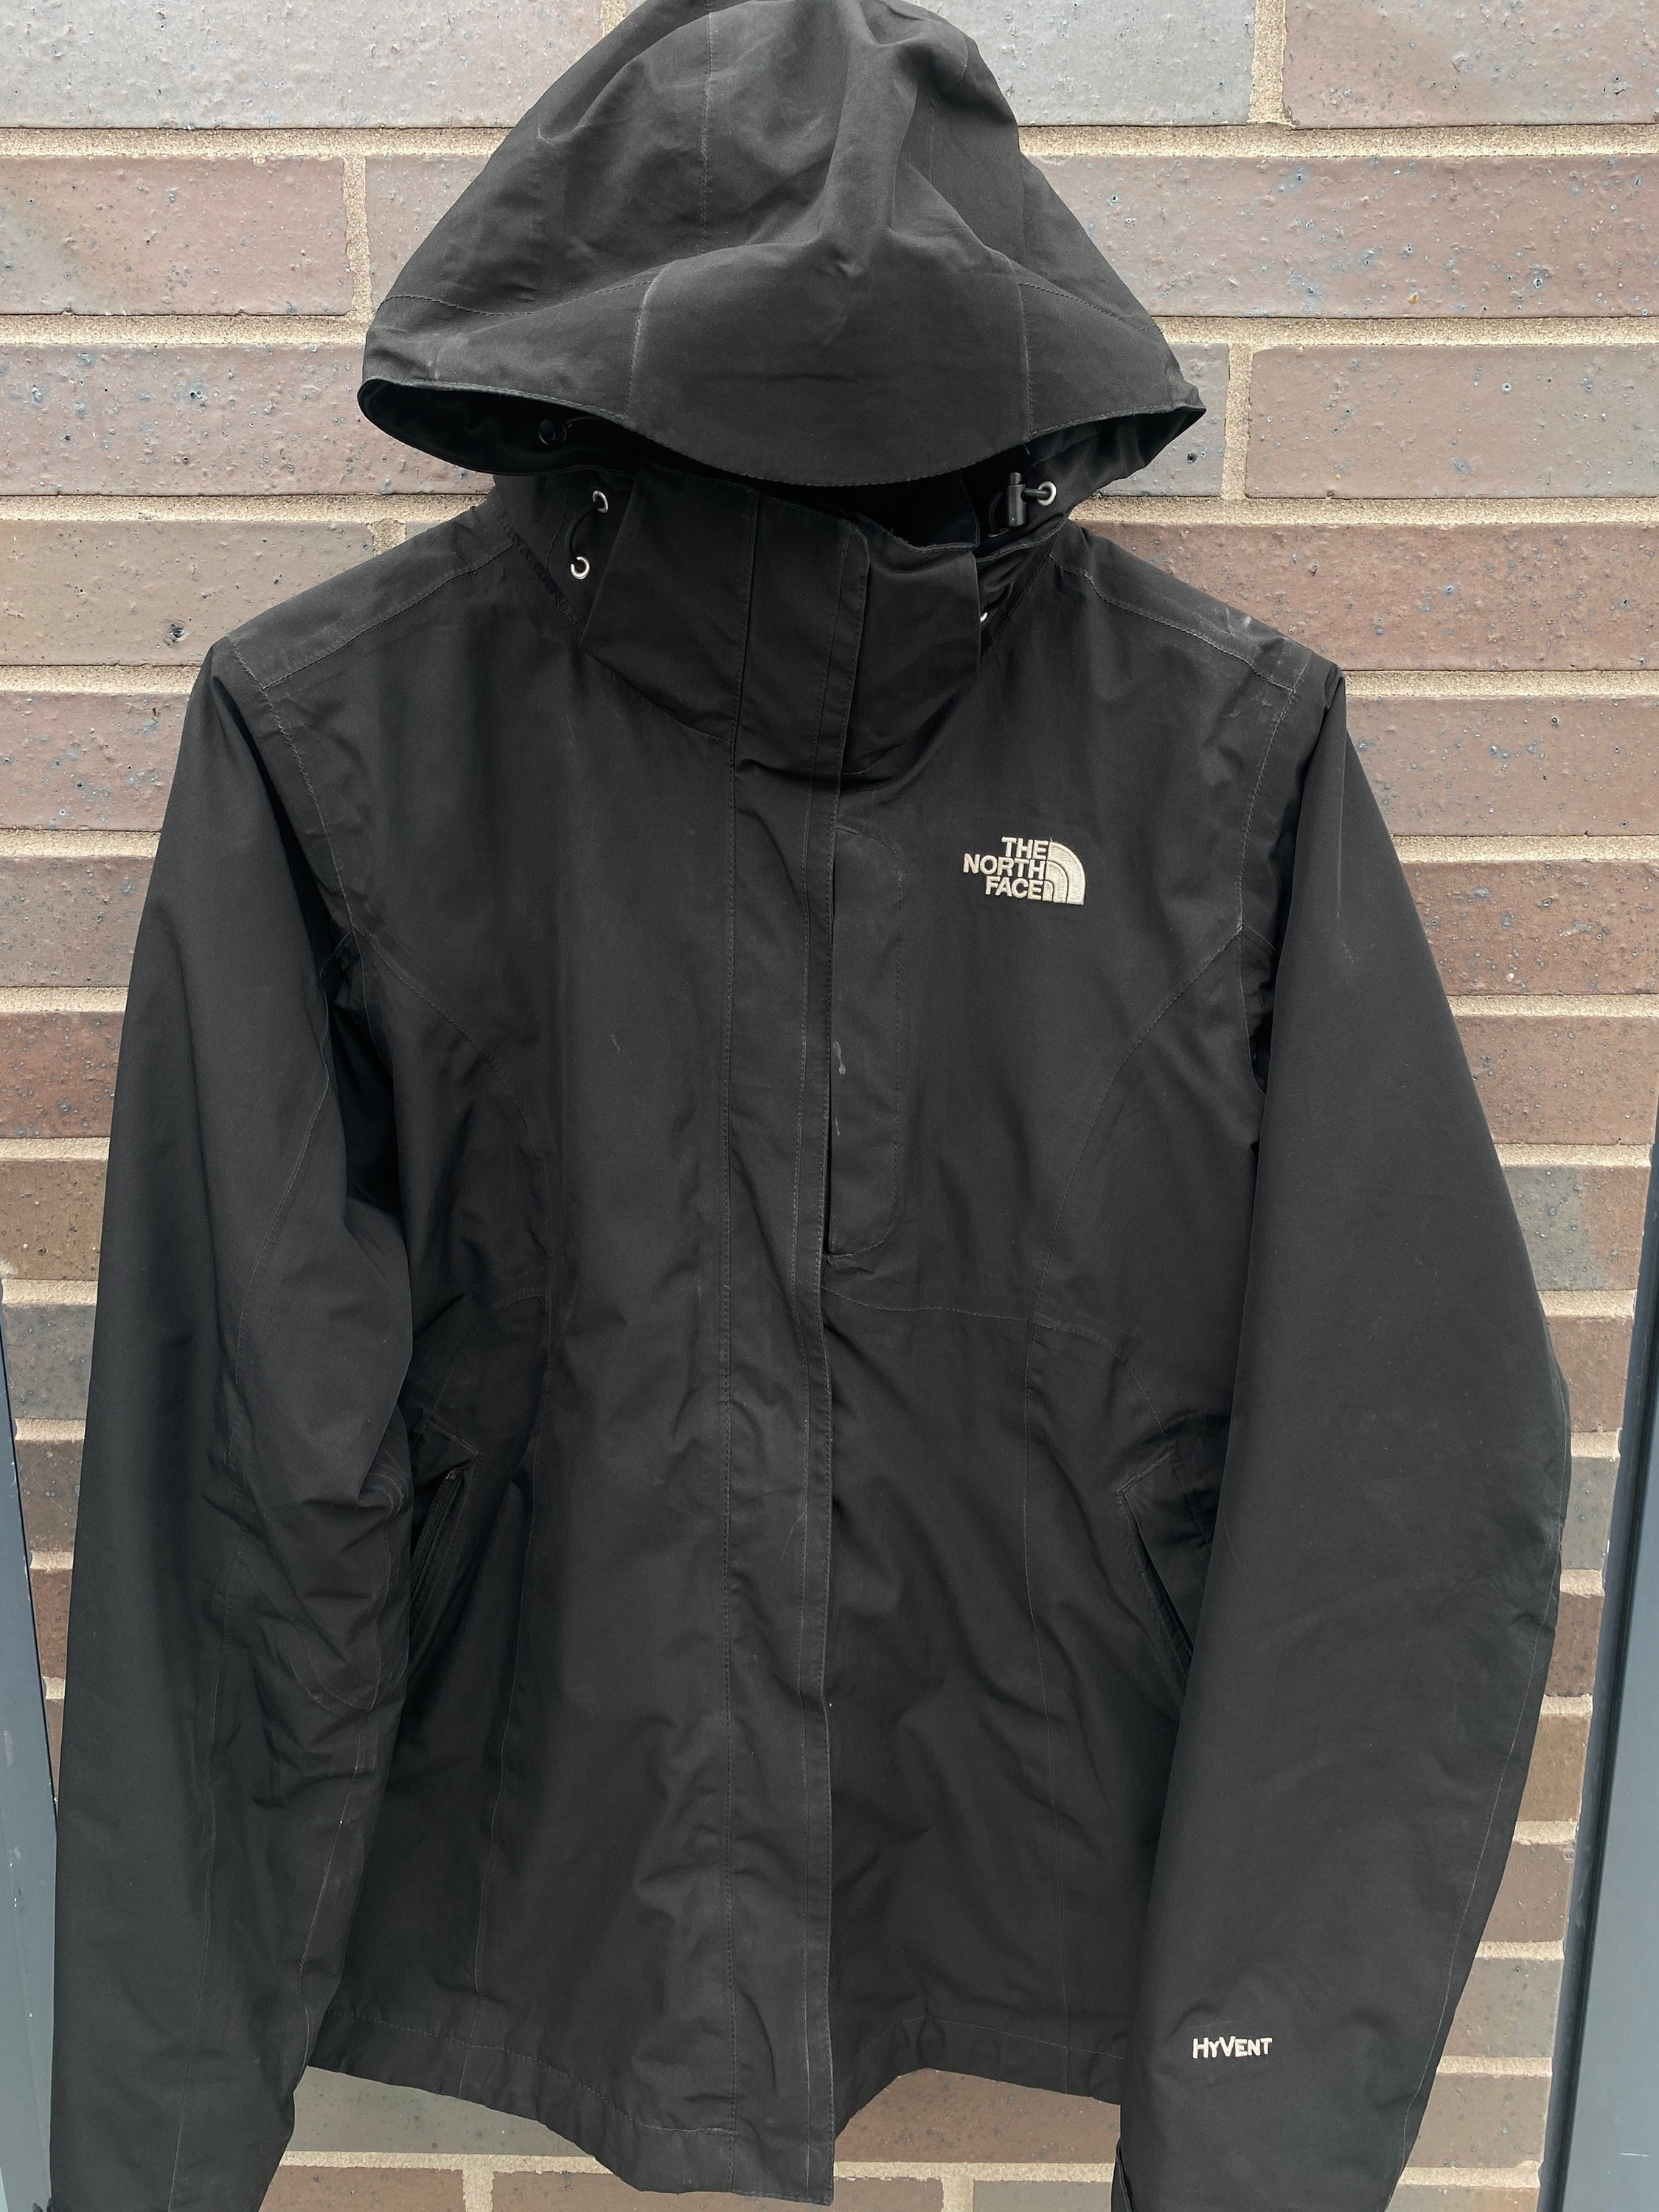 North Face Puffer Jacket -  Canada